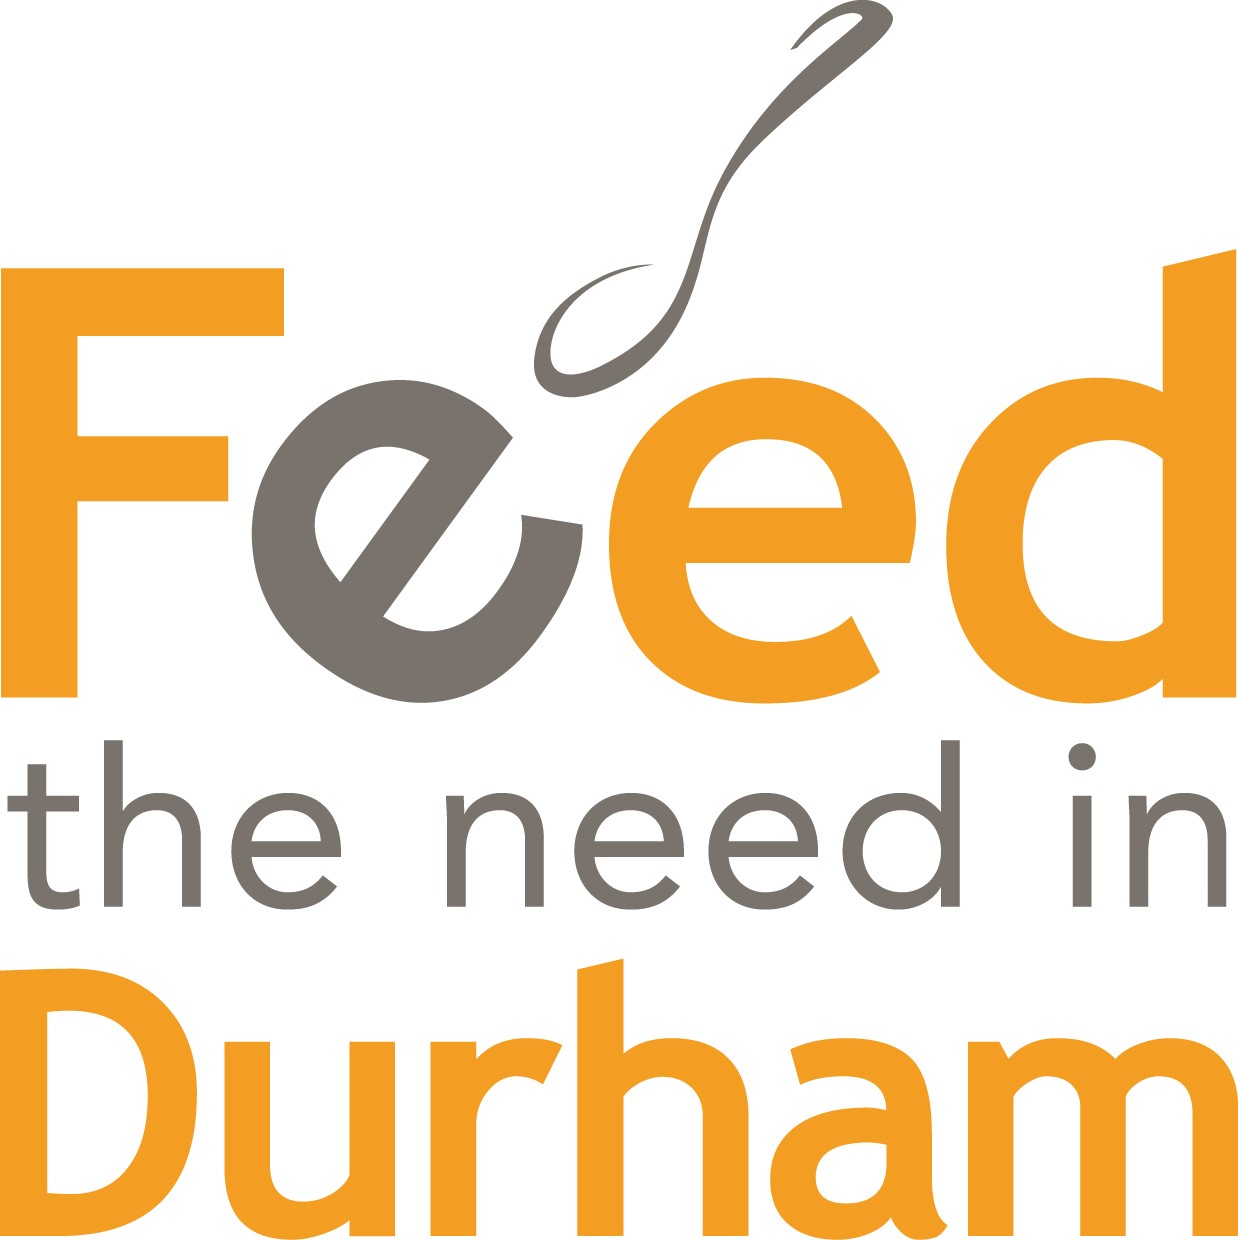 Feed the Need in Durham